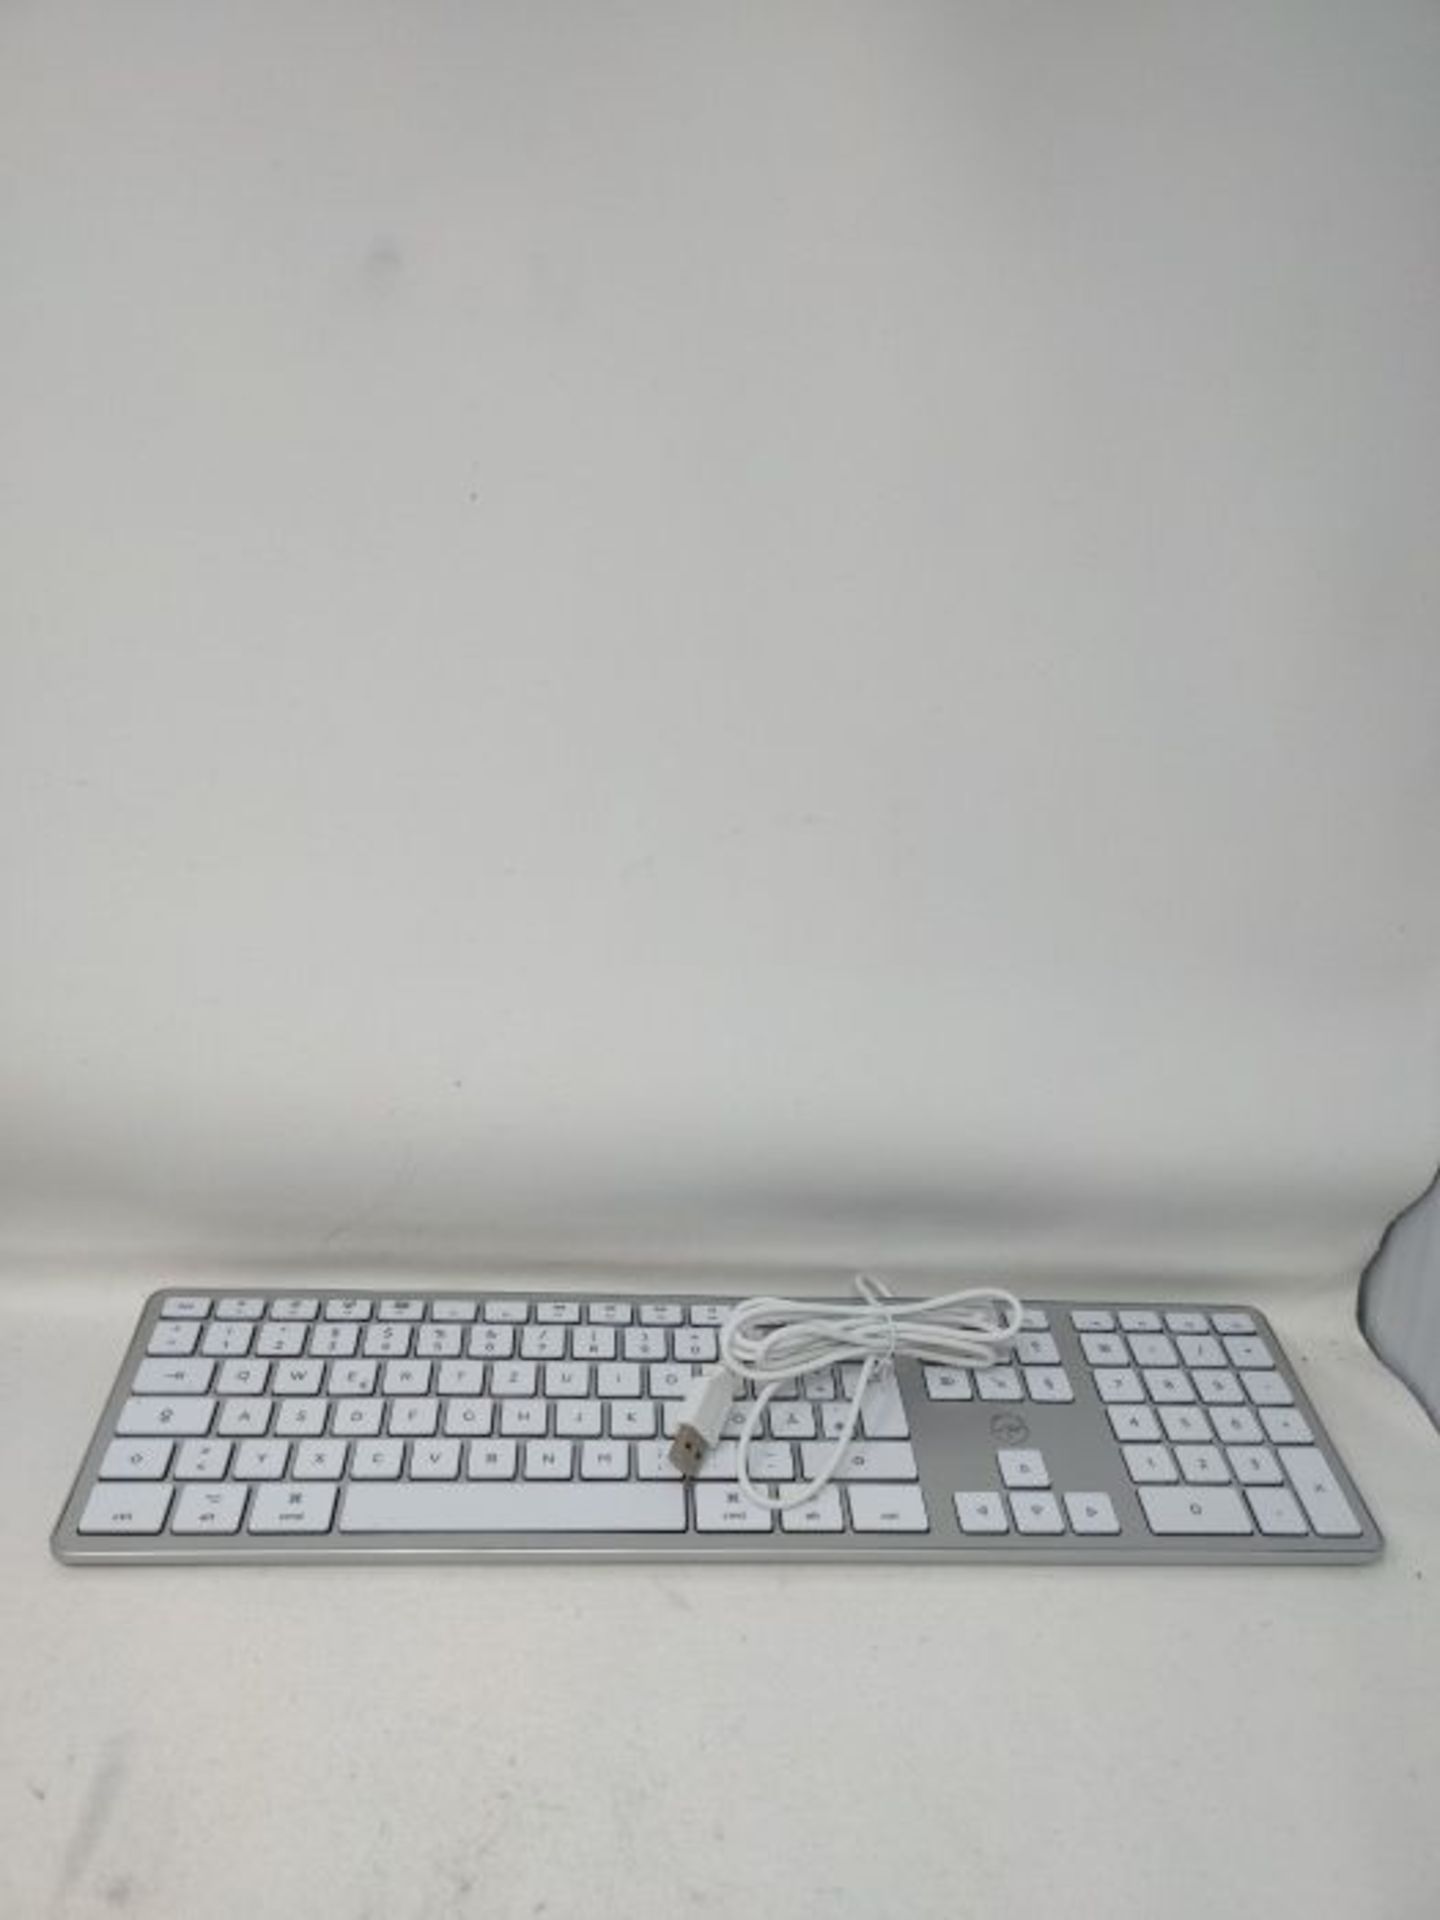 Mobility Lab ML311142 Wired Keyboard QWERTZ German Layout ideal for Mac - White/Silver - Image 3 of 3